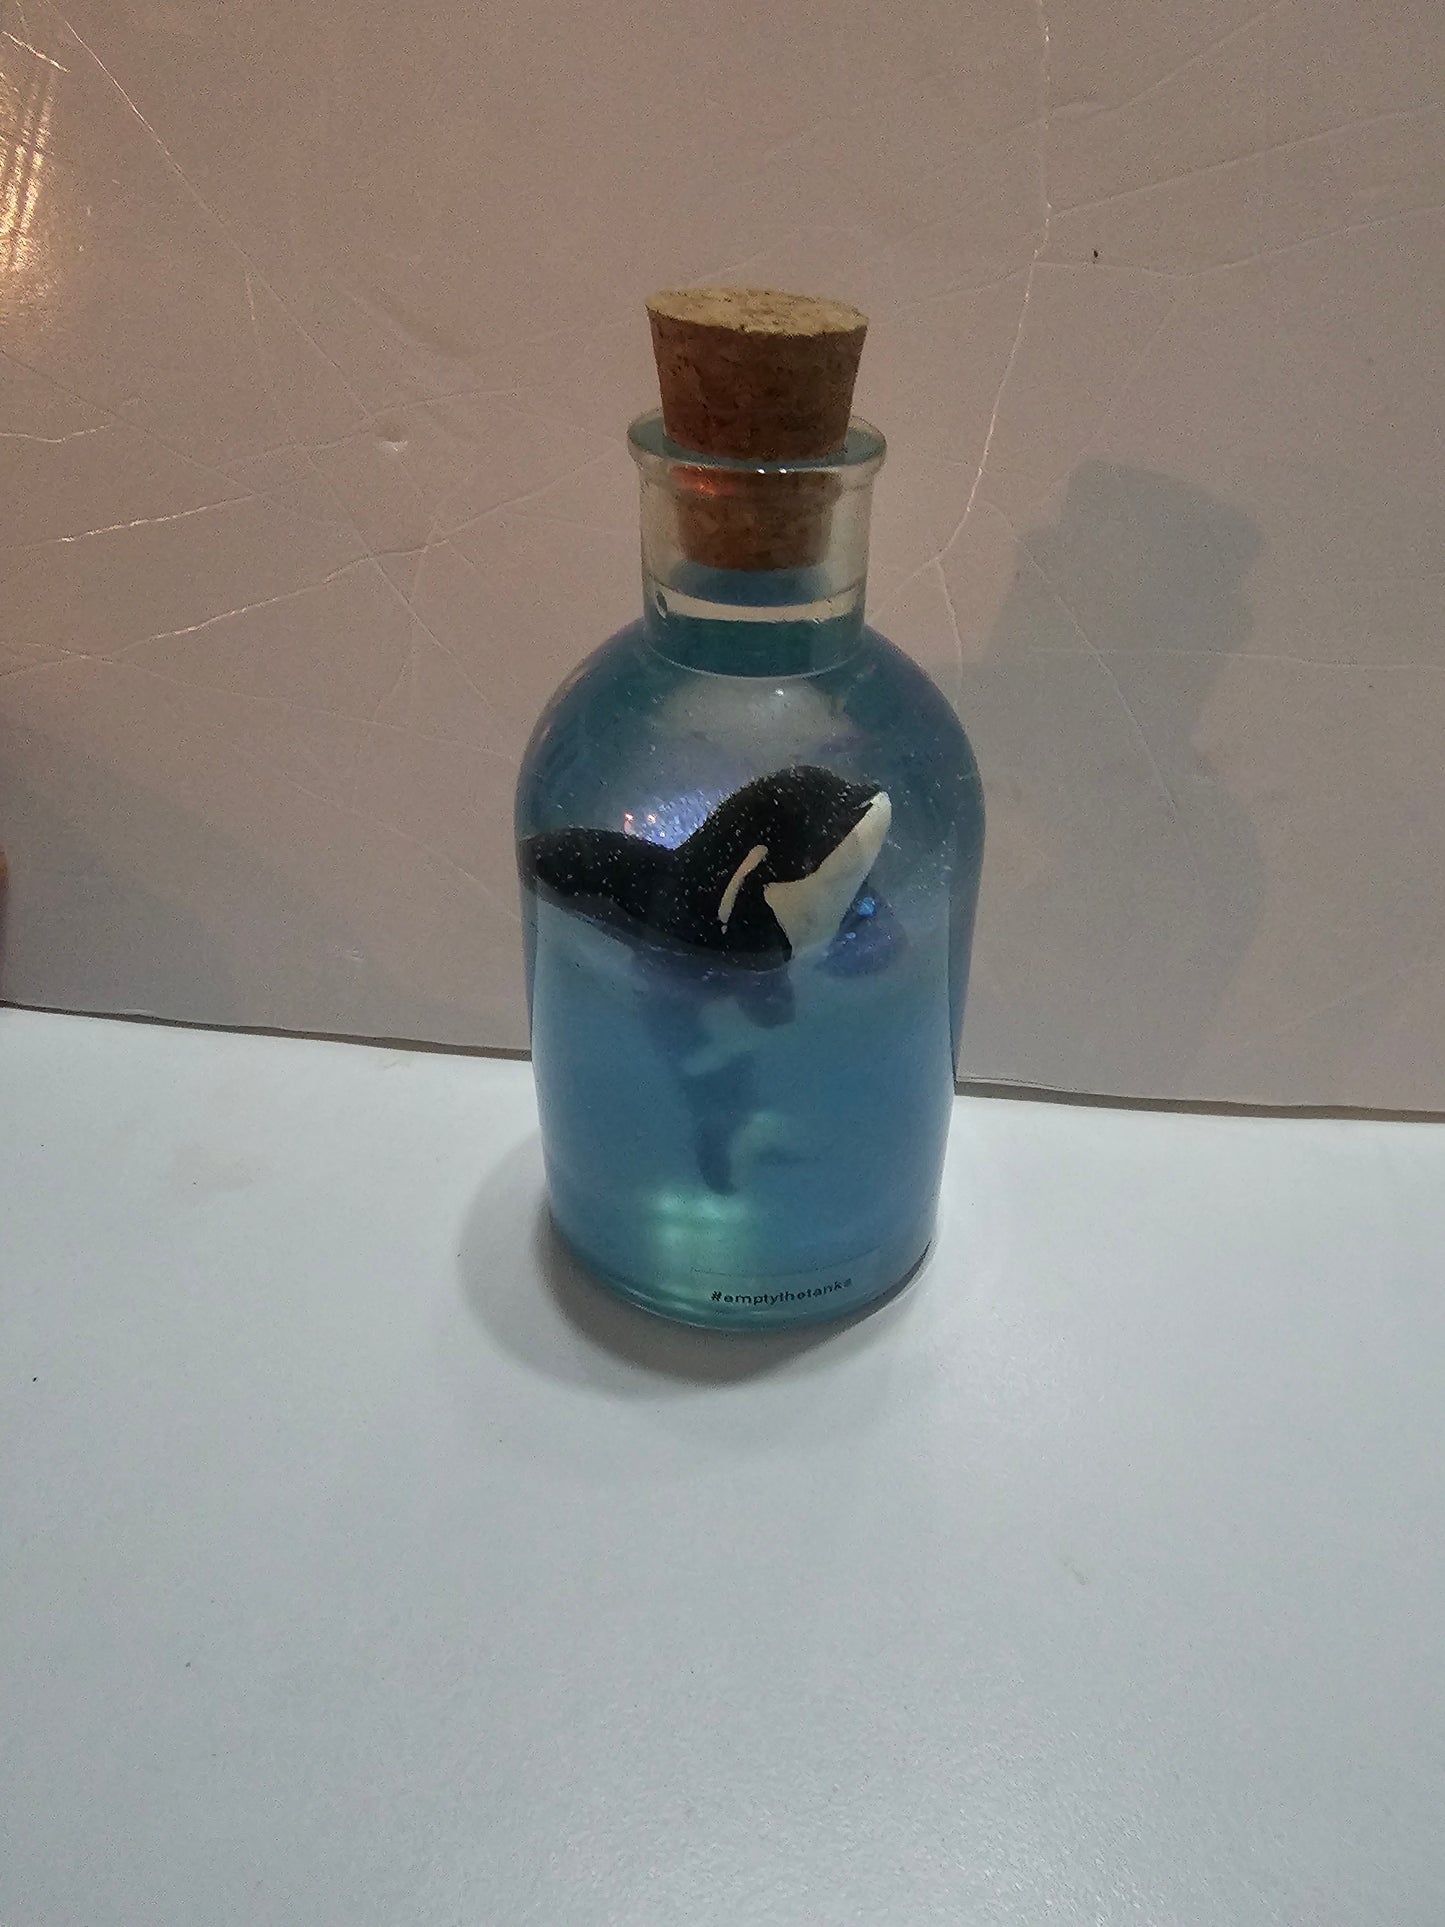 Message in a bottle - orca belong in the wild